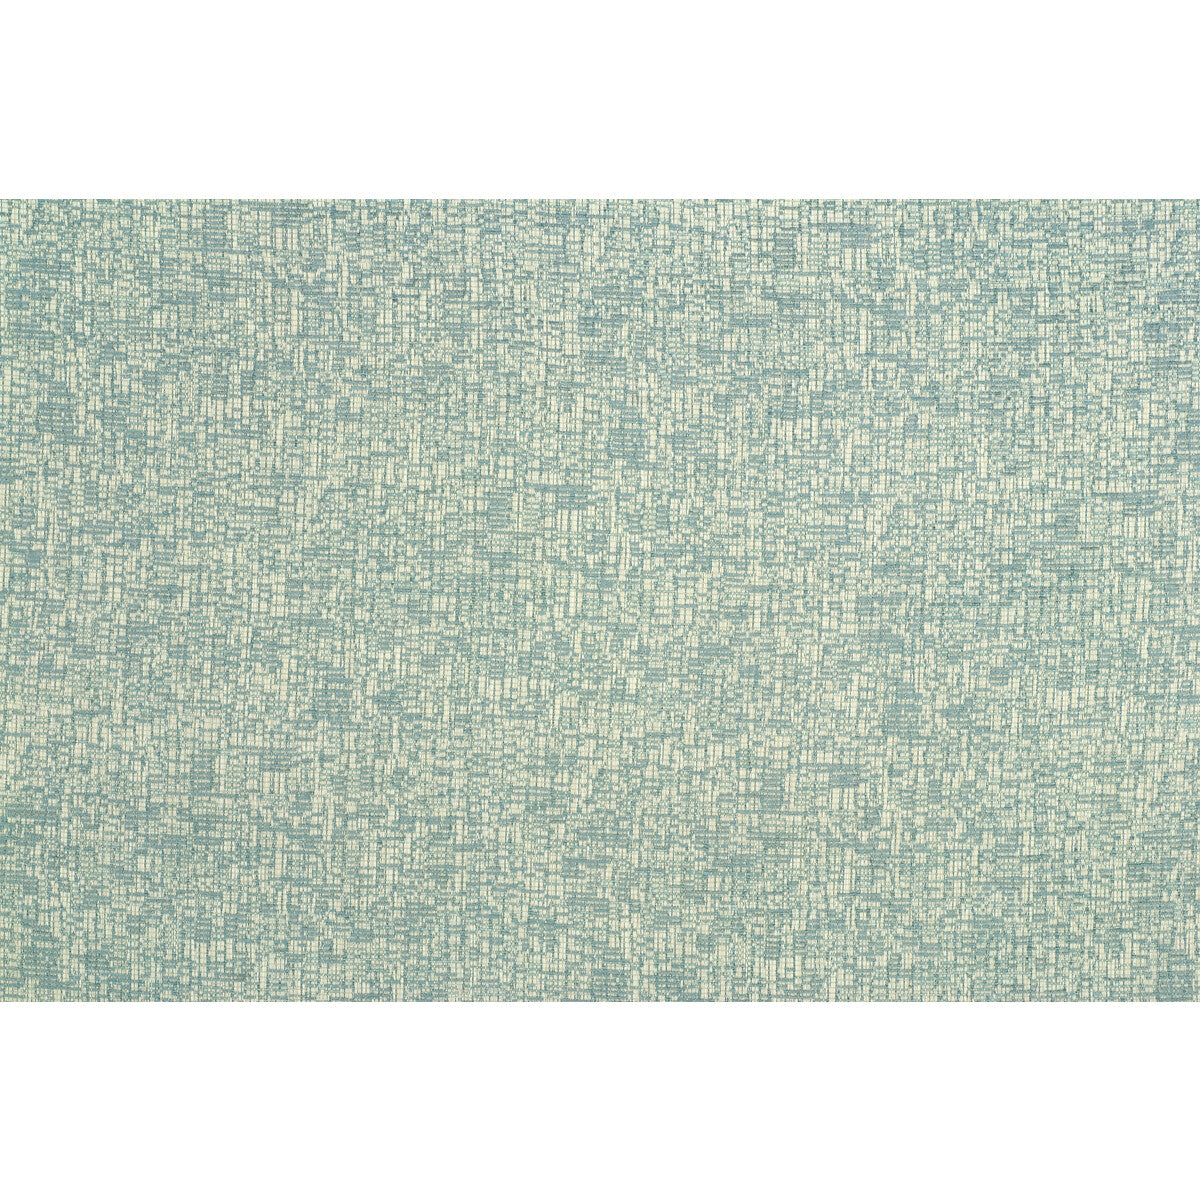 Kravet Contract fabric in 34737-15 color - pattern 34737.15.0 - by Kravet Contract in the Crypton Incase collection